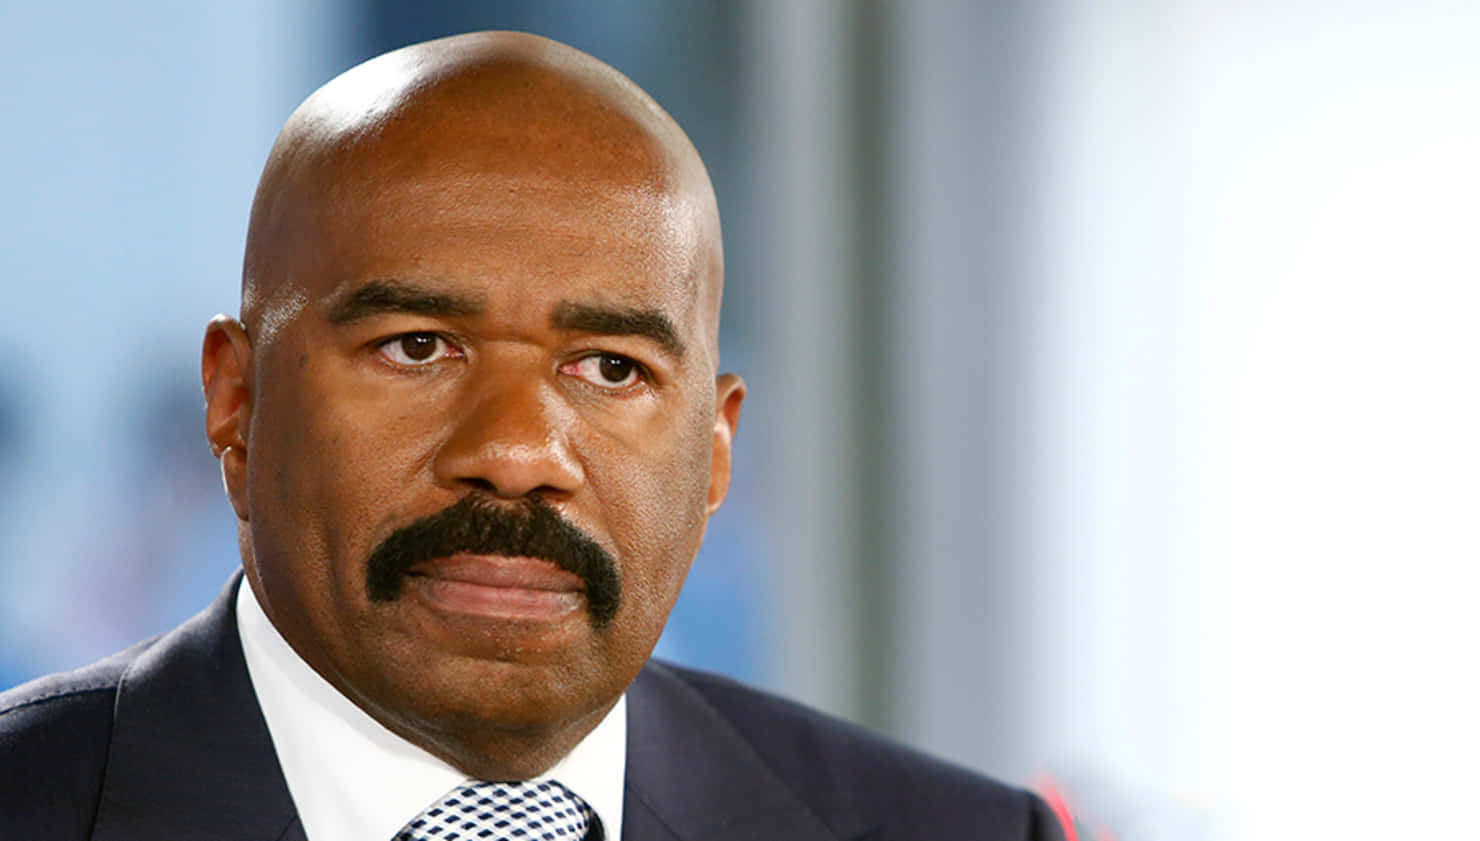 Steve Harvey Looking Towards The Right Background